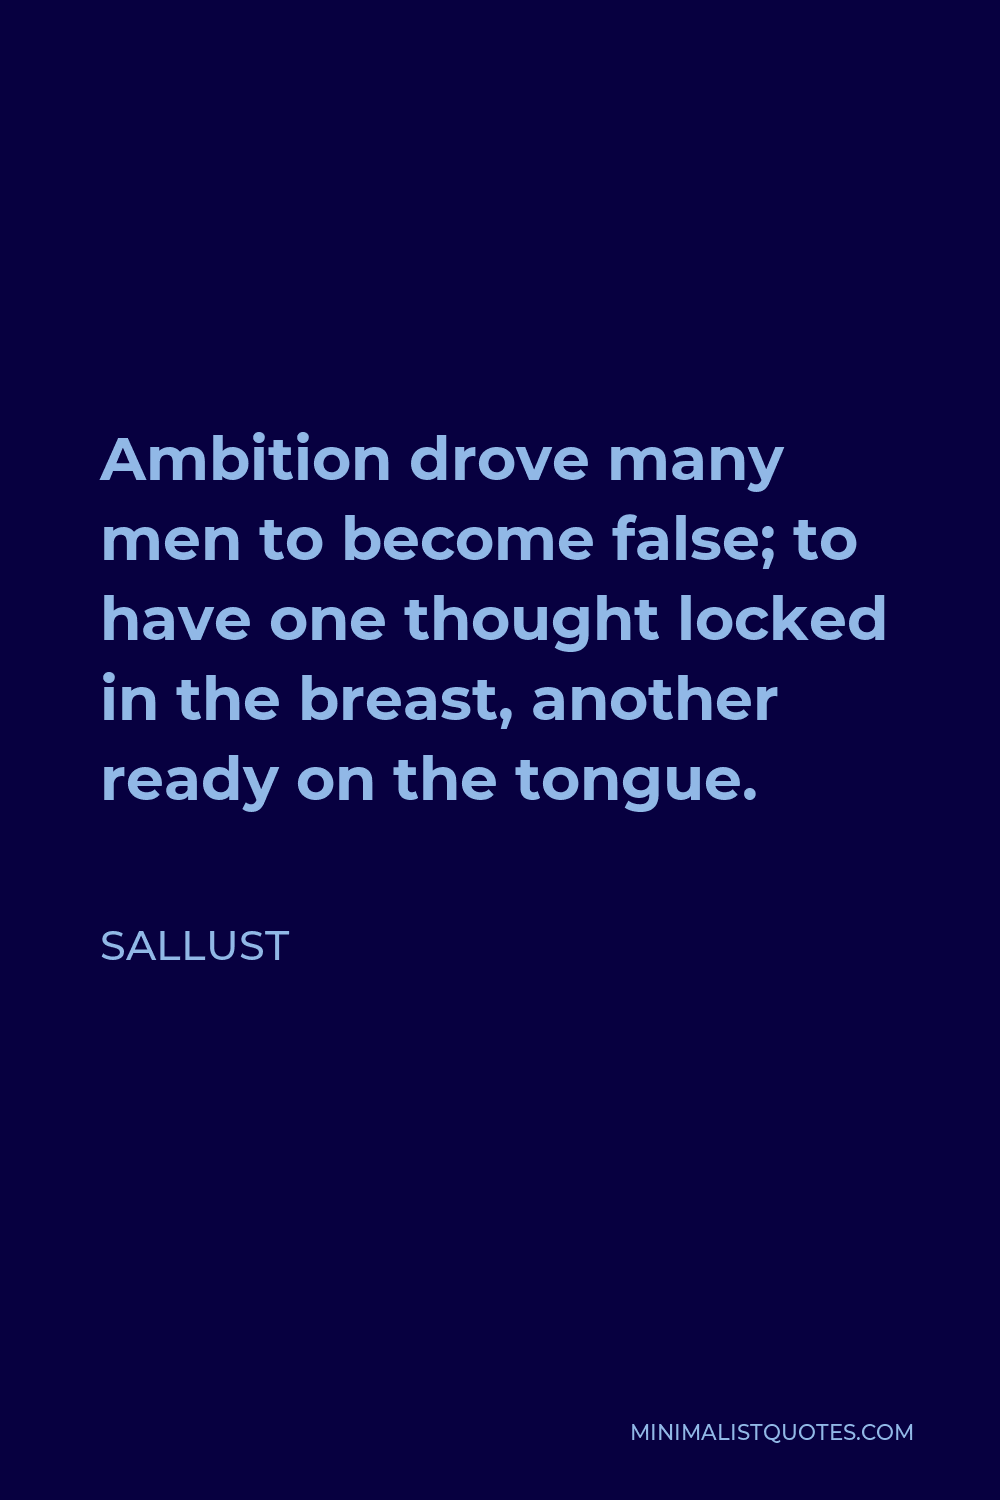 Sallust Quote - Ambition drove many men to become false; to have one thought locked in the breast, another ready on the tongue.